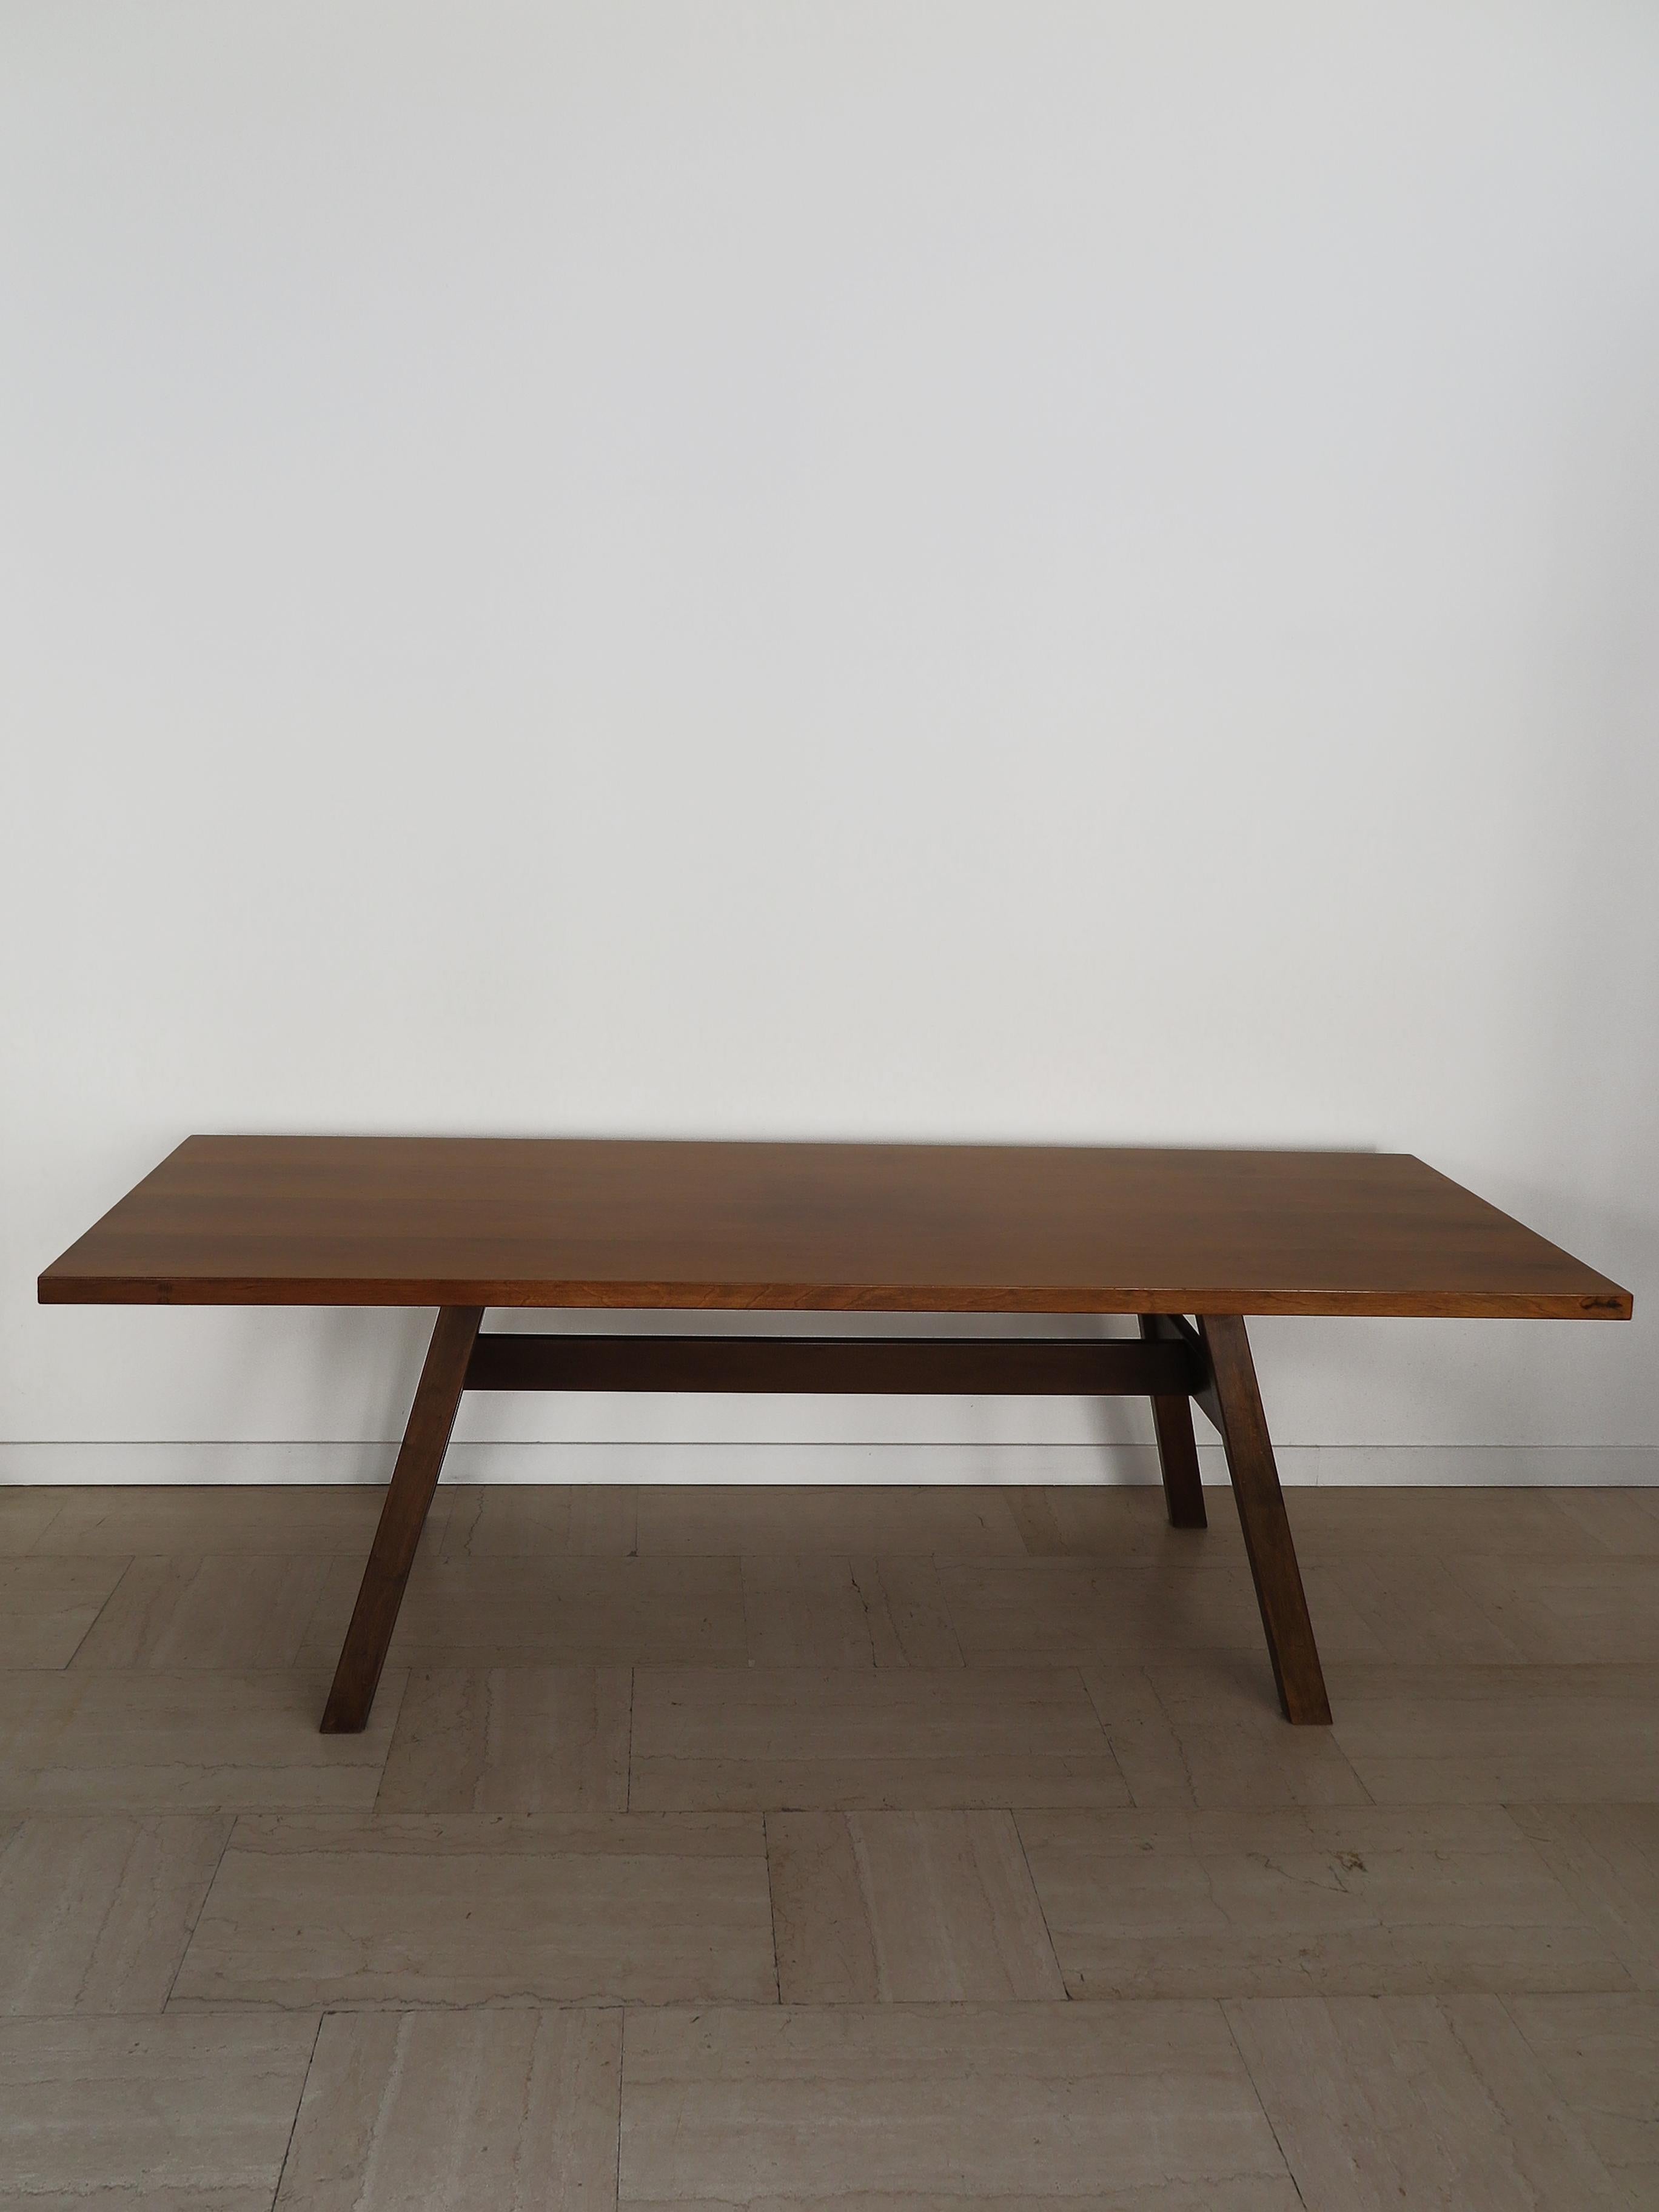 Mid-Century Modern Giovanni Michelucci for Poltronova Italian Midcentury Consolle Dining Table 1960 For Sale